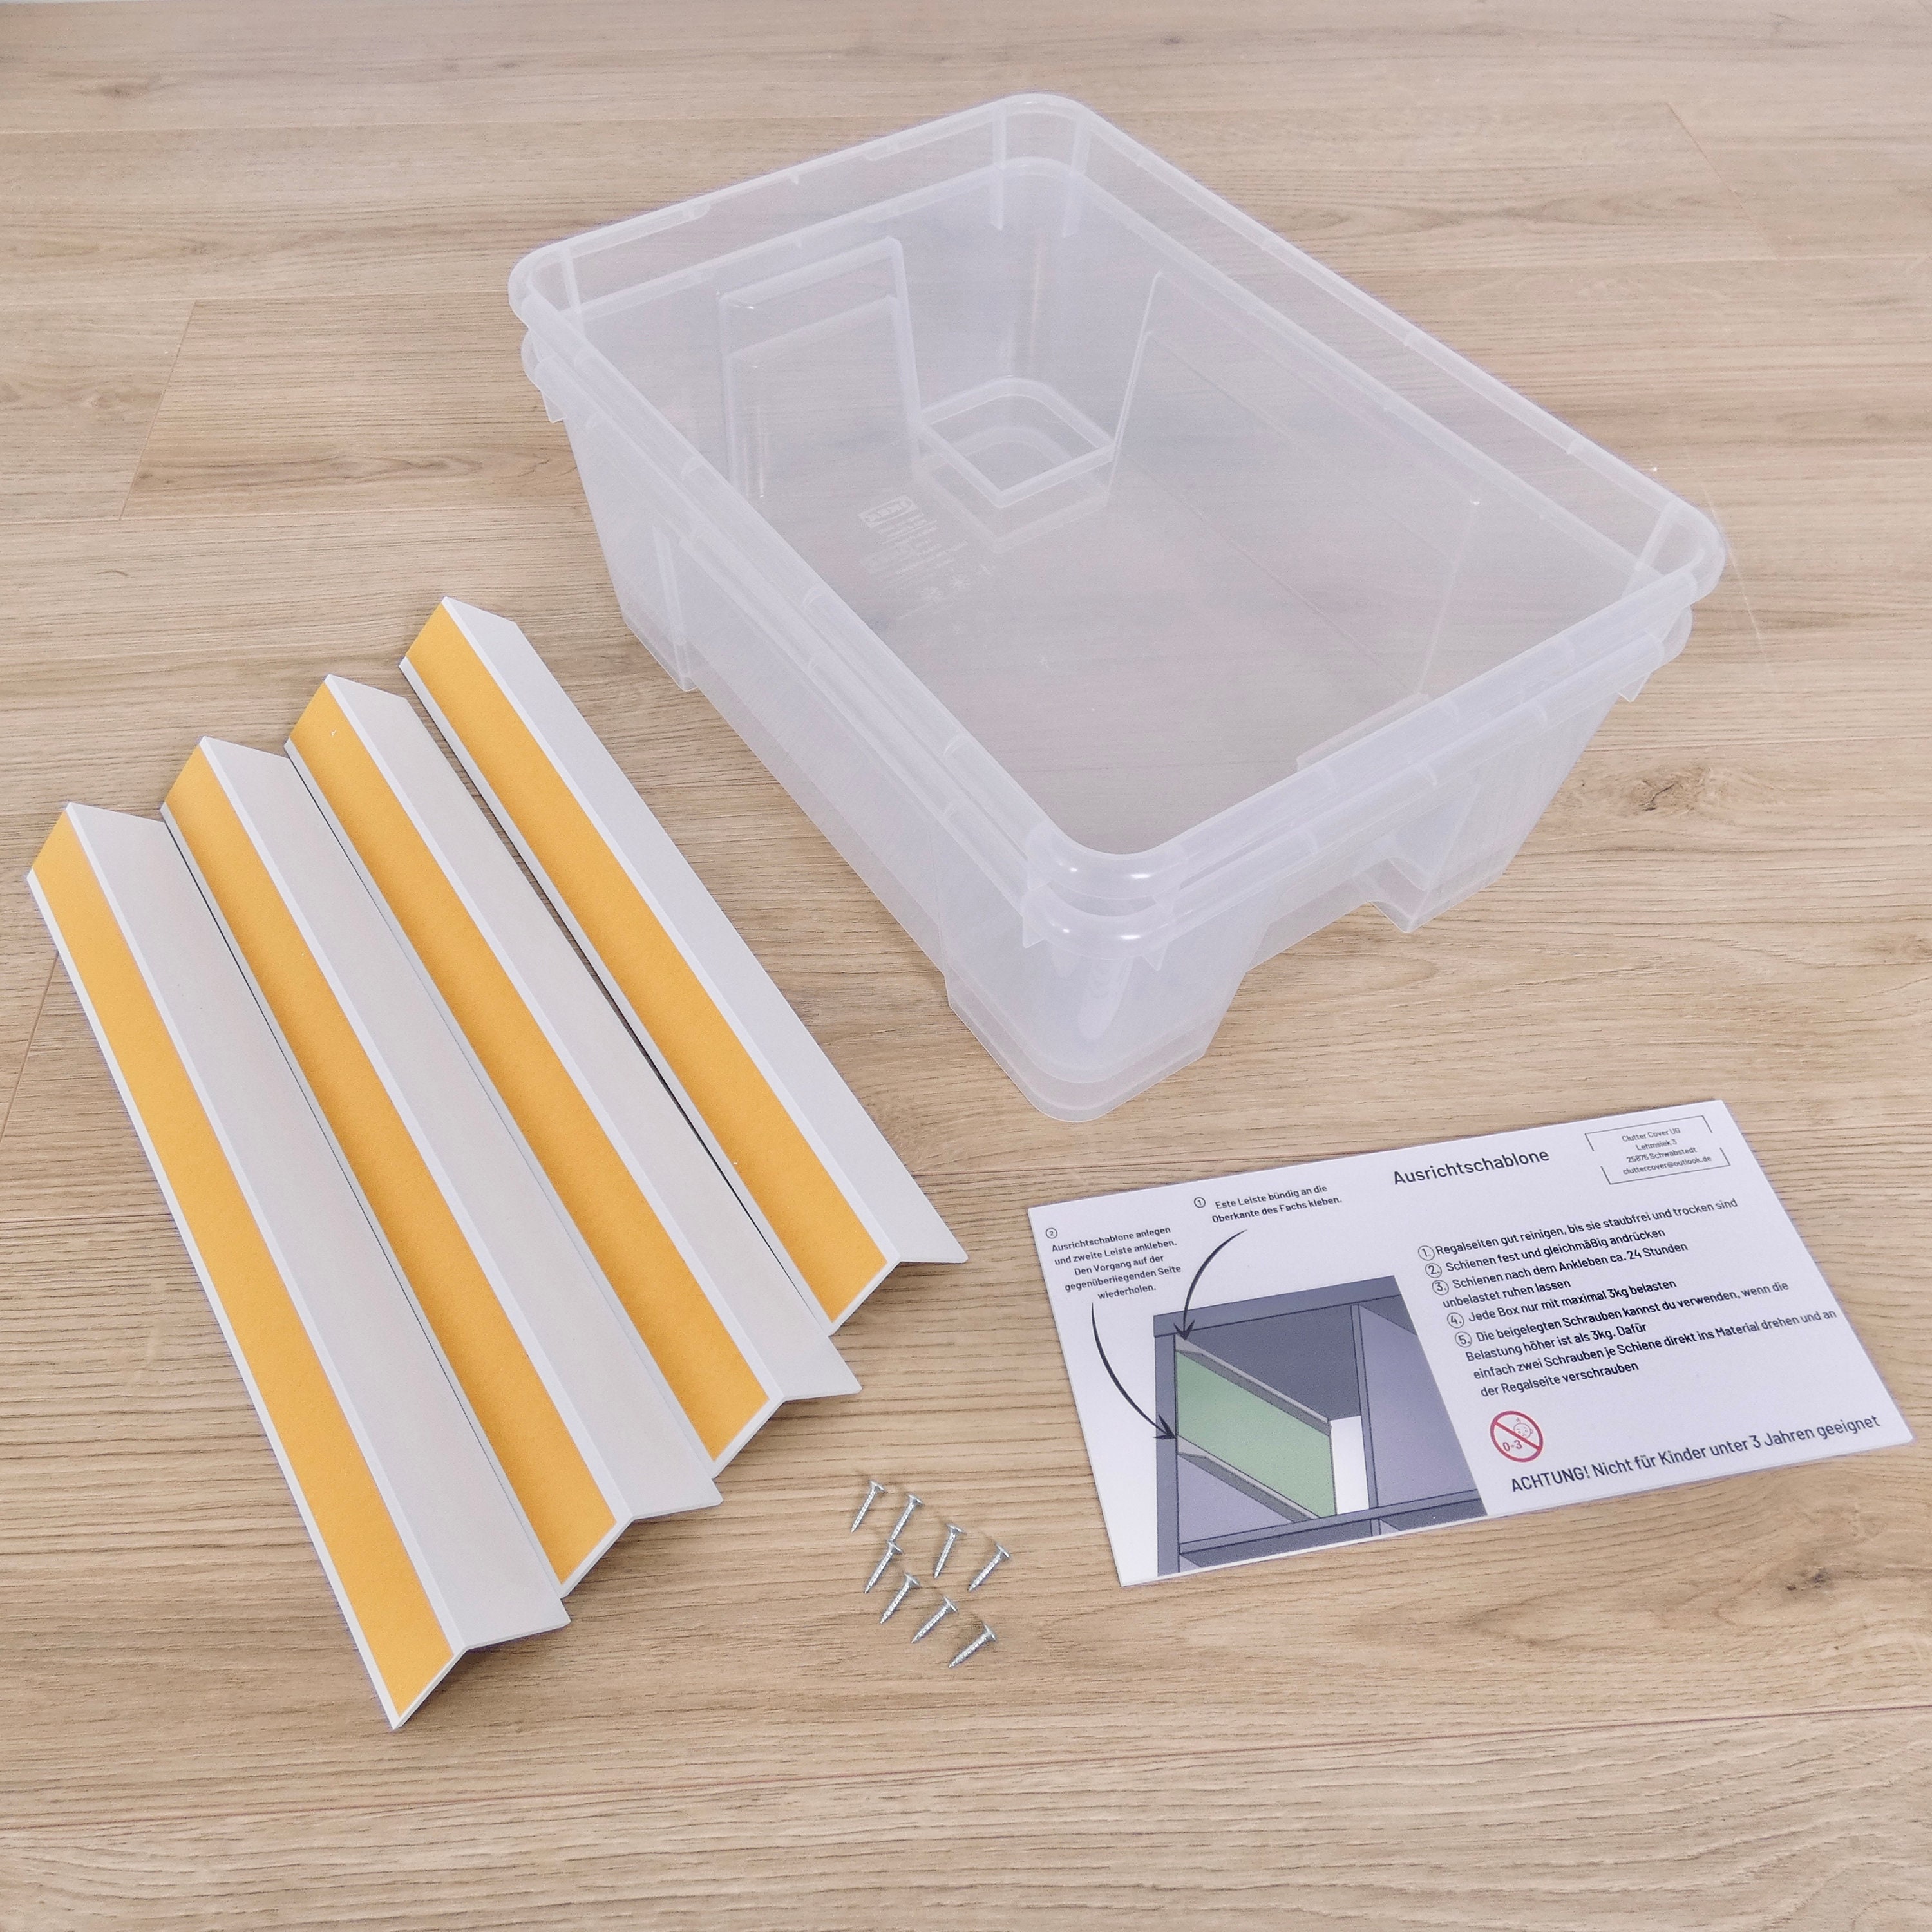 Ikea Kallax Rail Insert for Samla Boxes, Holder for Transparent Storage  Boxes, Also Suitable for Expedit Shelf 